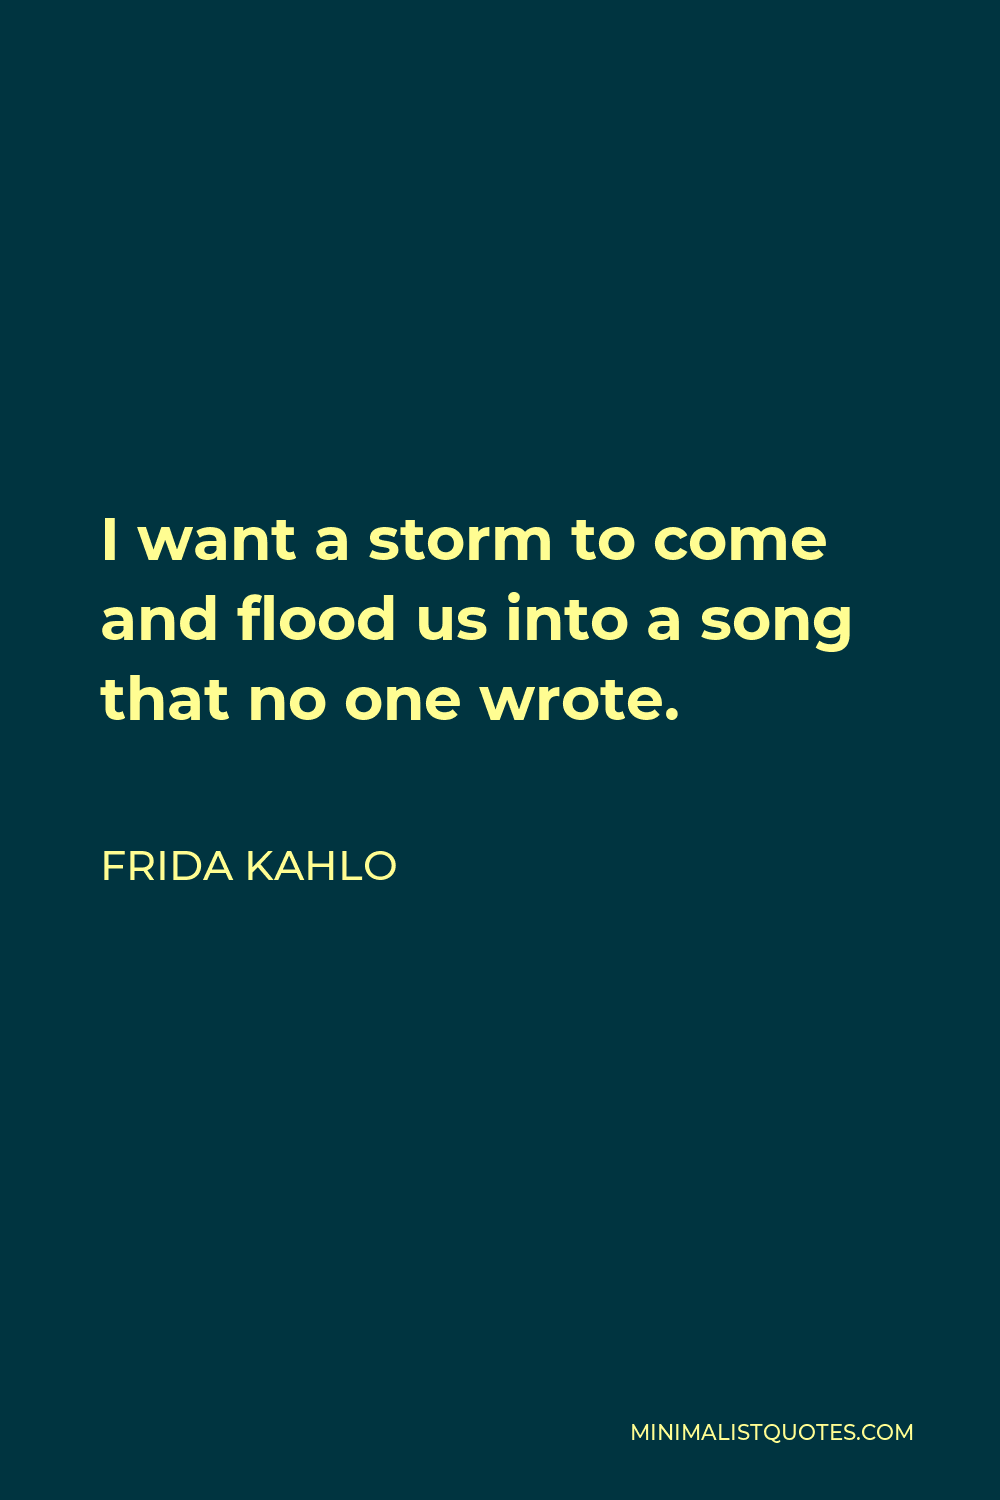 Frida Kahlo Quote - I want a storm to come and flood us into a song that no one wrote.